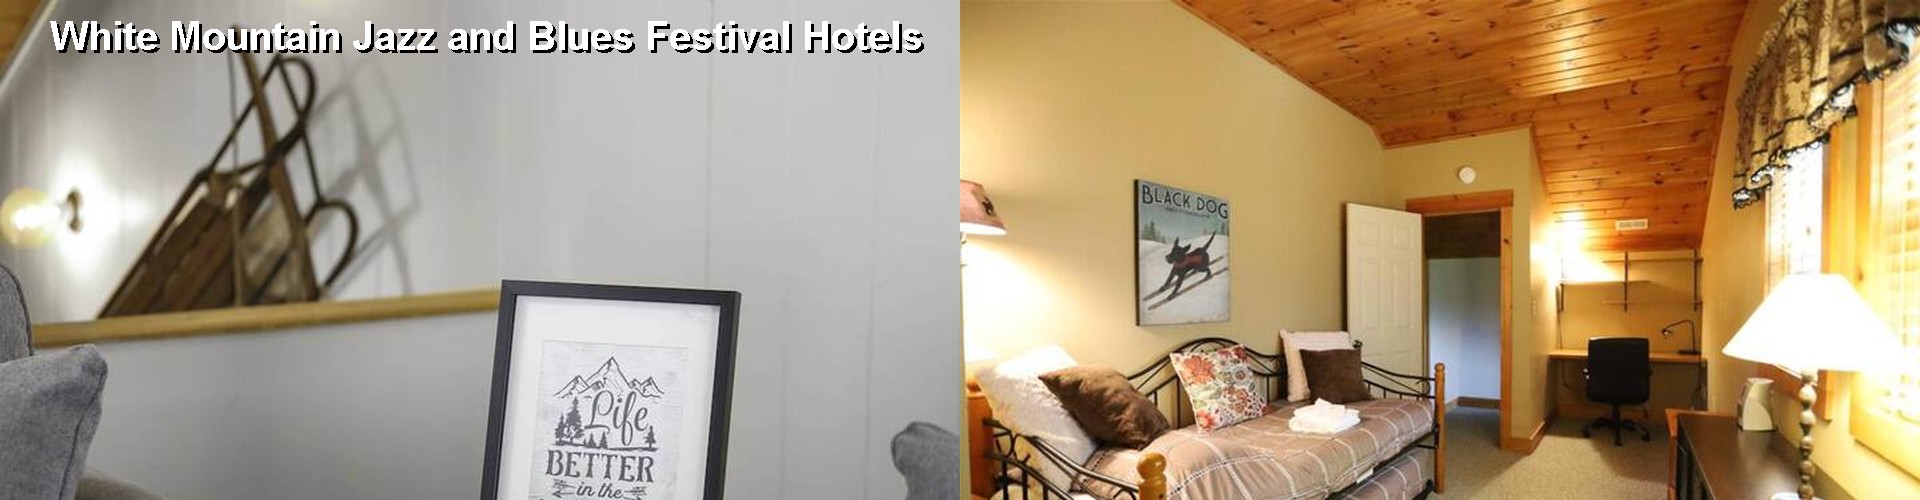 5 Best Hotels near White Mountain Jazz and Blues Festival